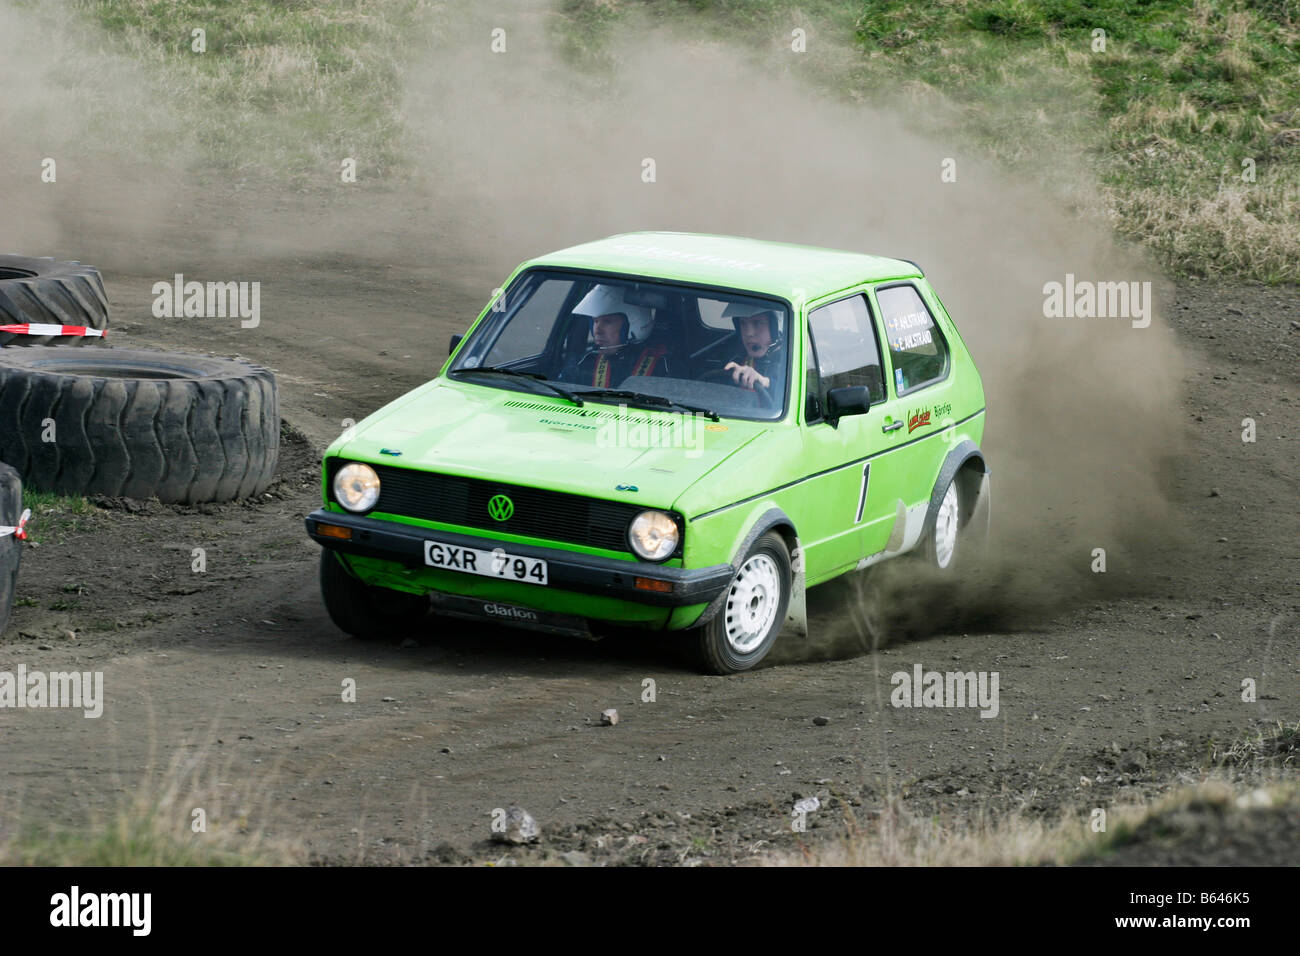 Volkswagen Golf rally car in a race Stock Photo - Alamy